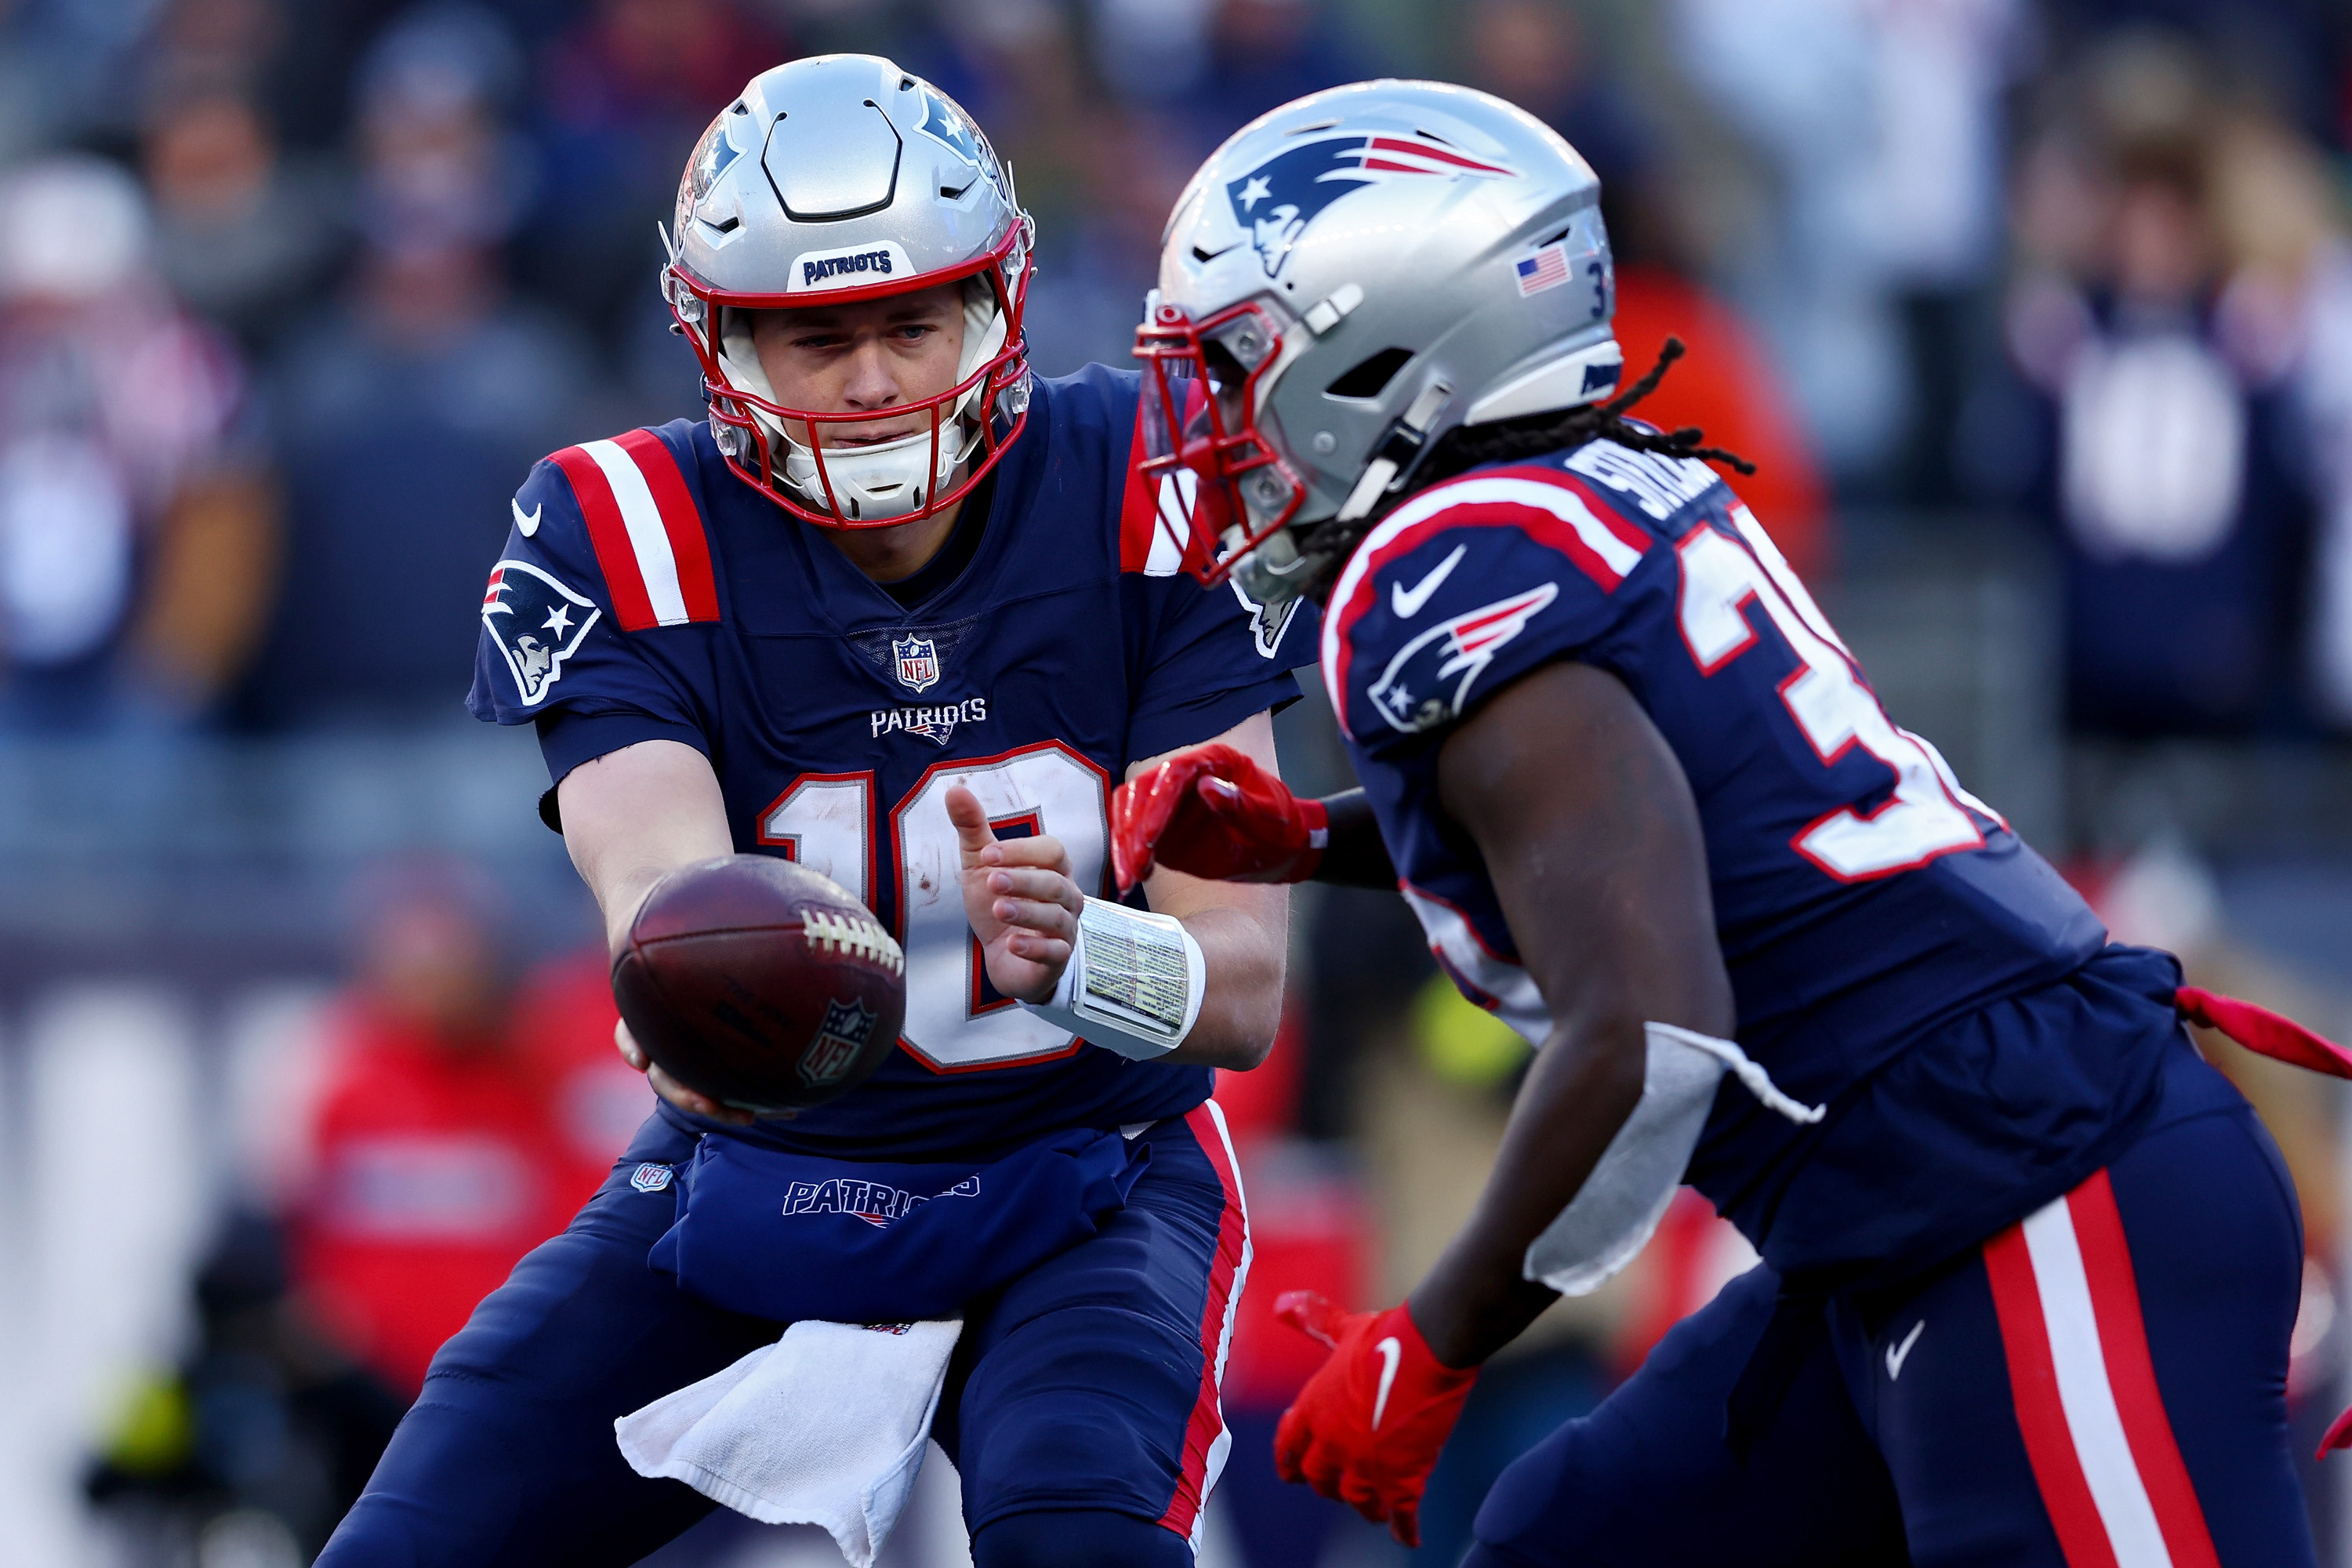 Mac Jones #10 of the New England Patriots hands the ball off to Rhamondre Stevenson #38 of the New England Patriots during the second quarter against the New York Jets at Gillette Stadium on November 20, 2022 in Foxborough, Massachusetts.